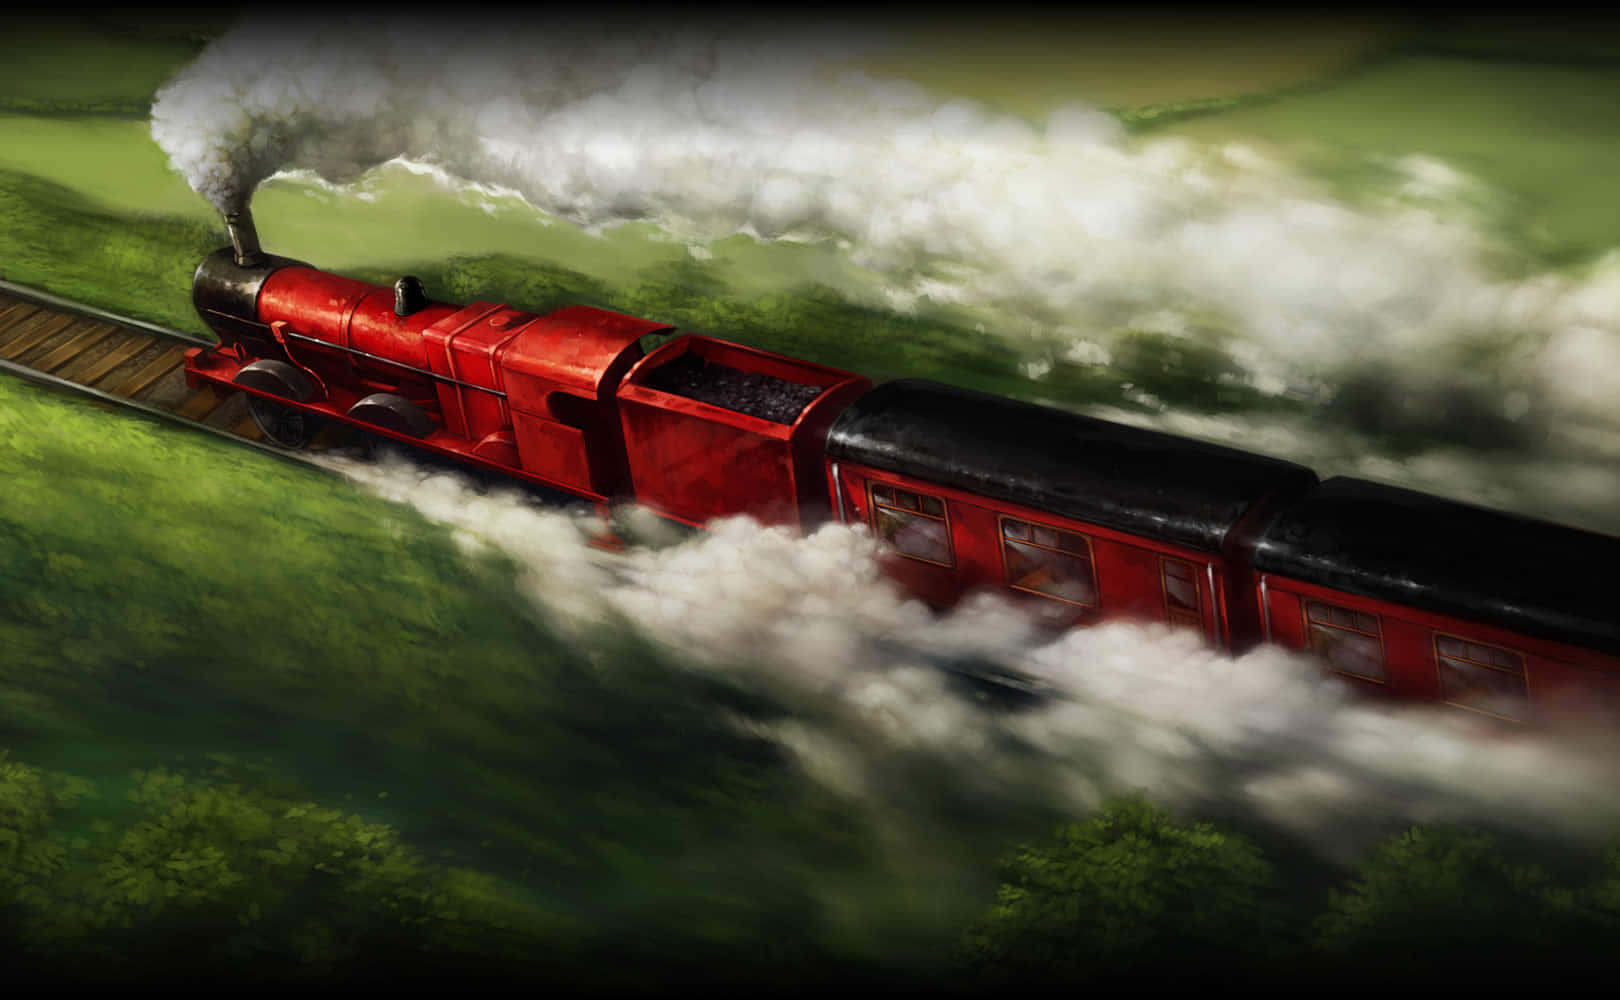 All Aboard! The Hogwarts Express Train to Hogwarts School of Witchcraft and Wizardry Wallpaper